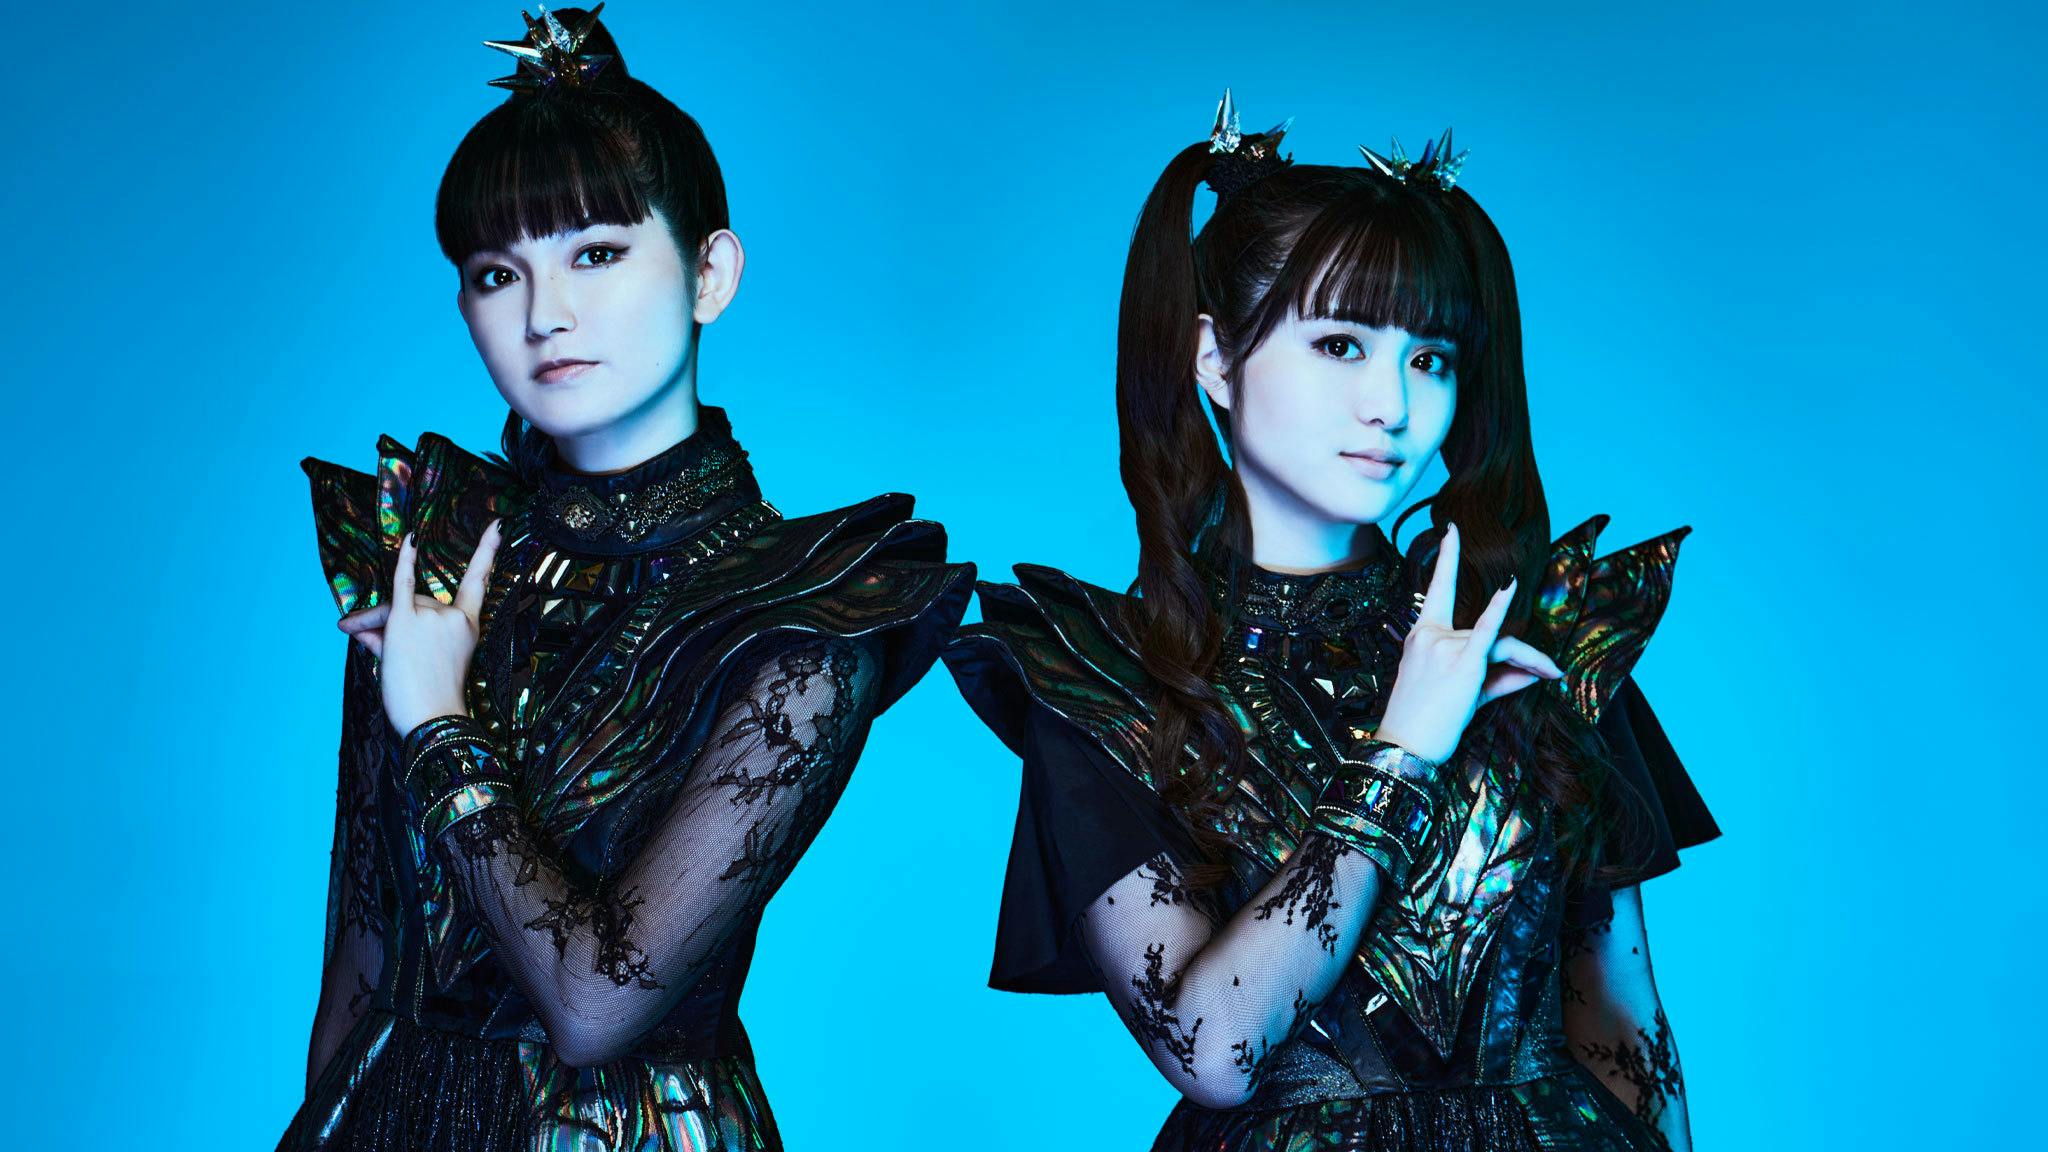 BABYMETAL reflect on becoming a duo: “We decided, ‘Let’s put in everything we’ve got’”